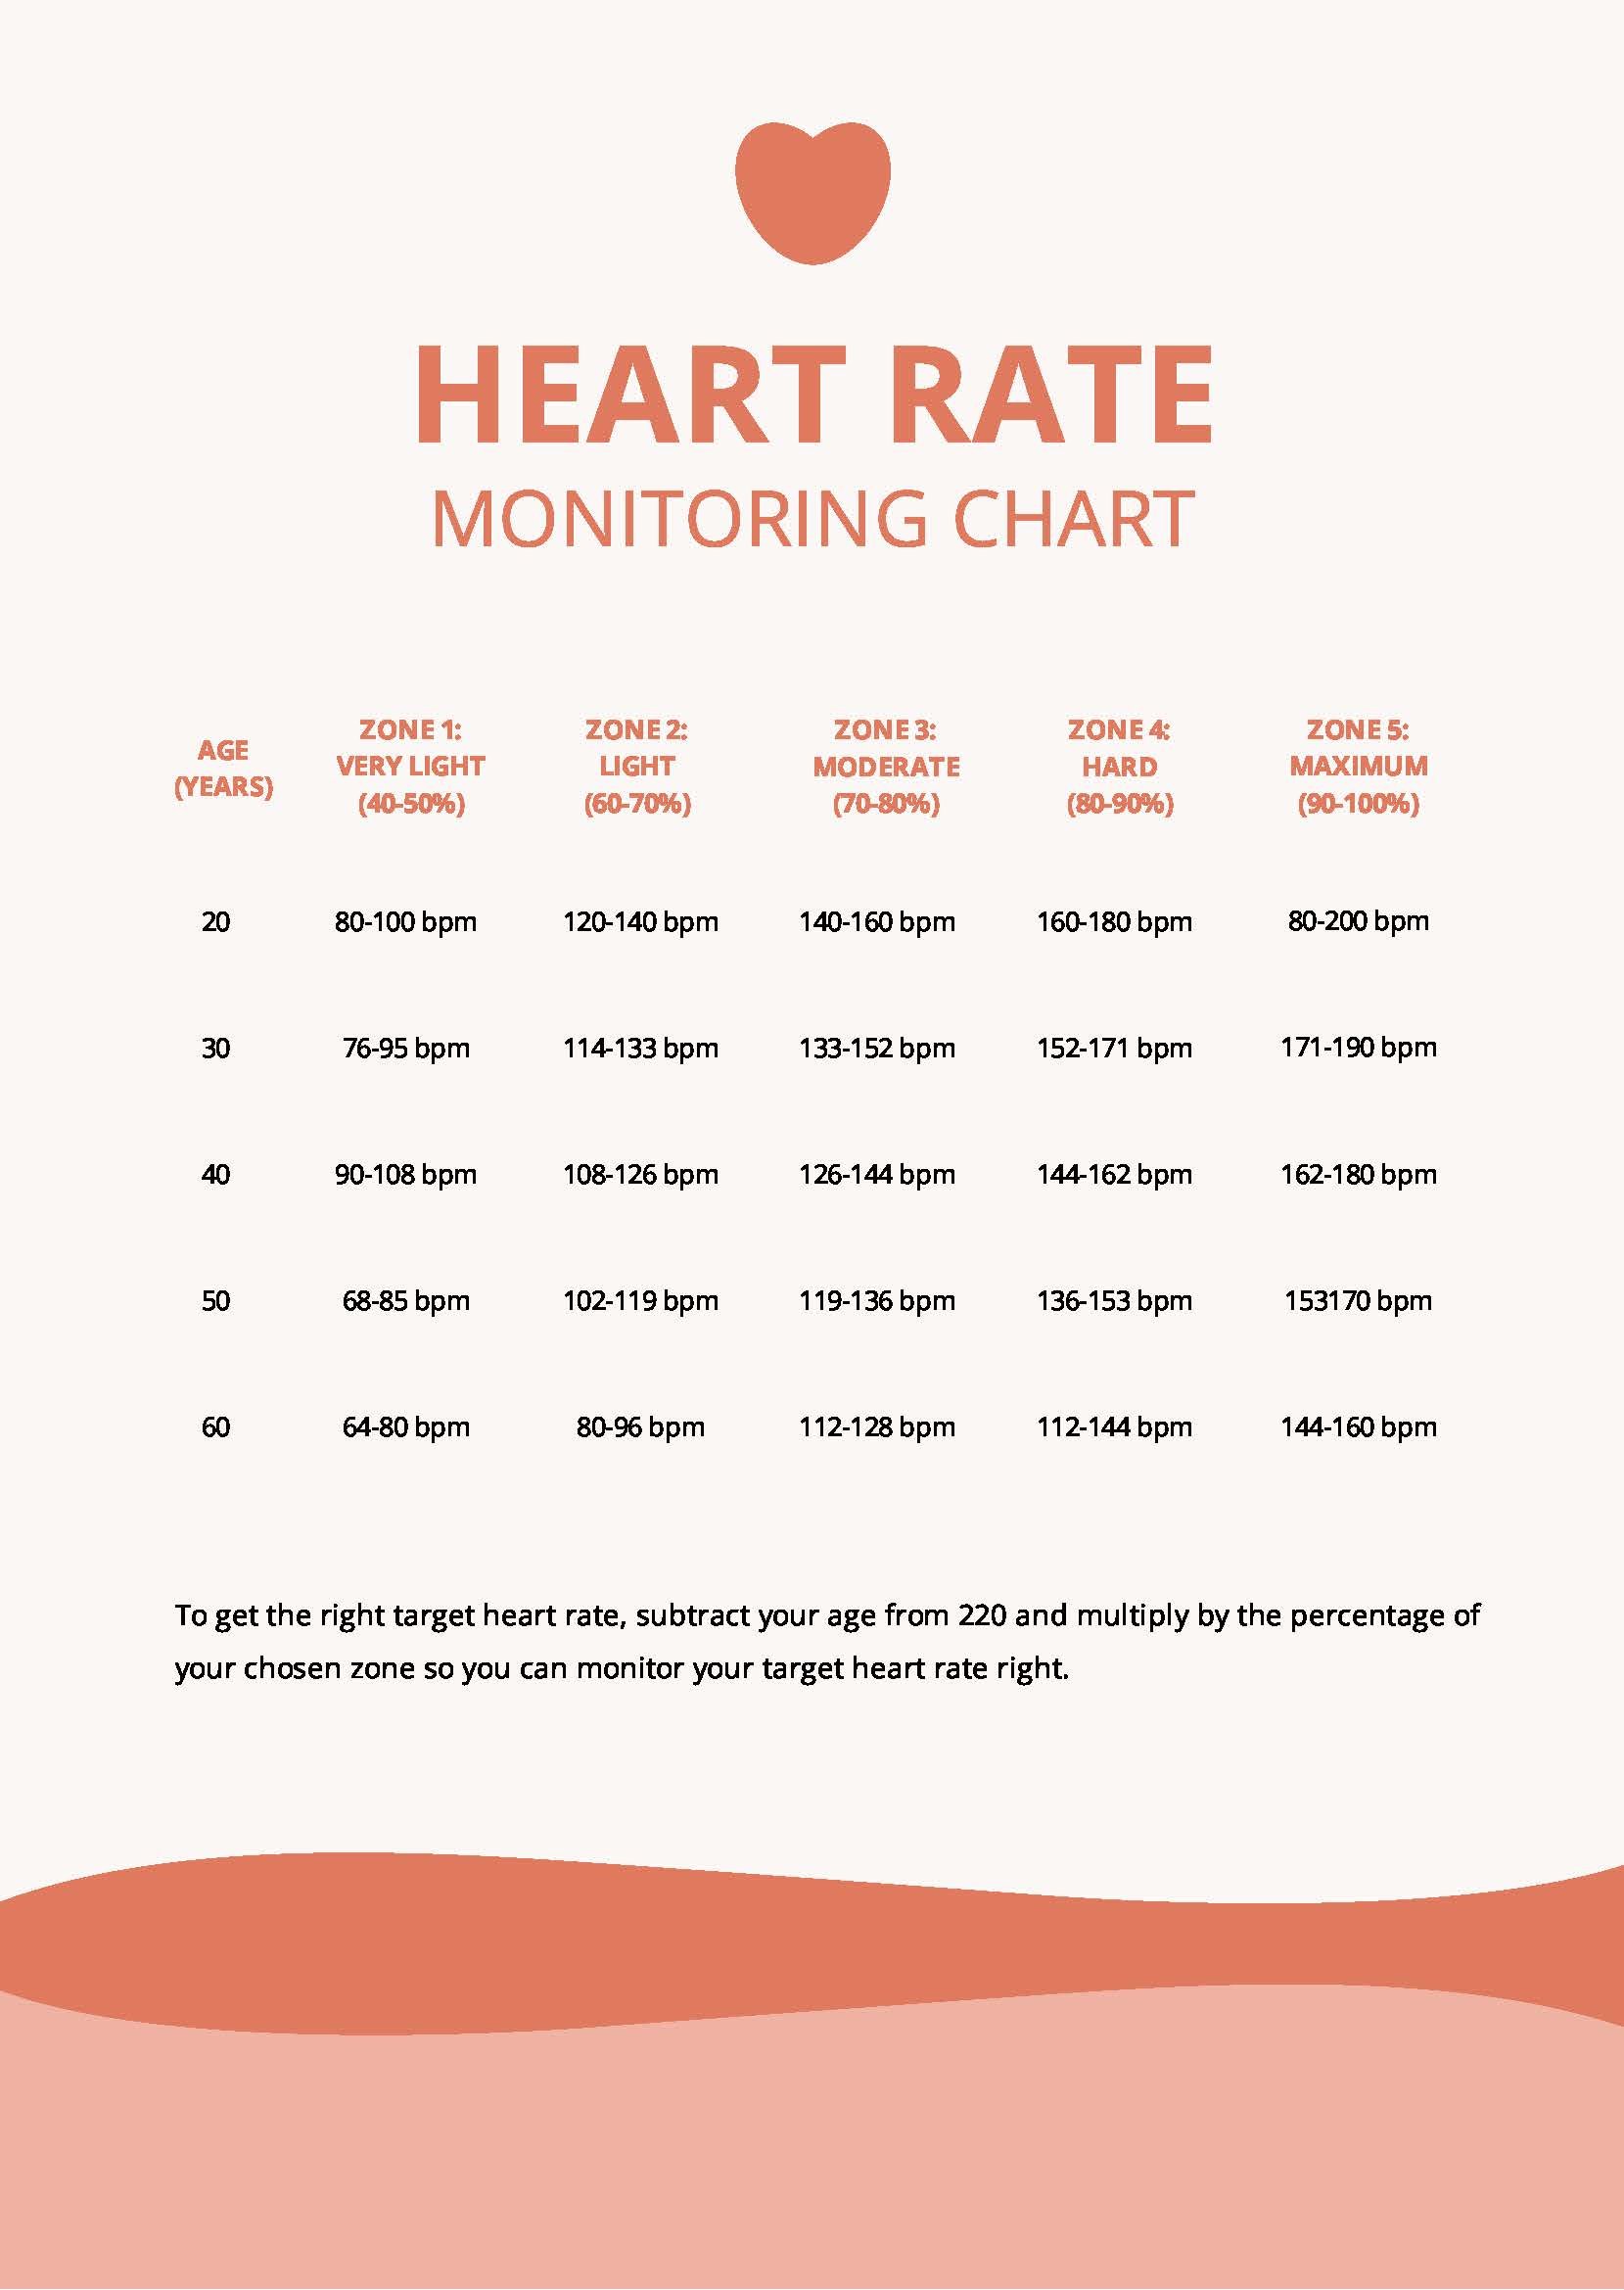 Heart Rate Monitoring Chart